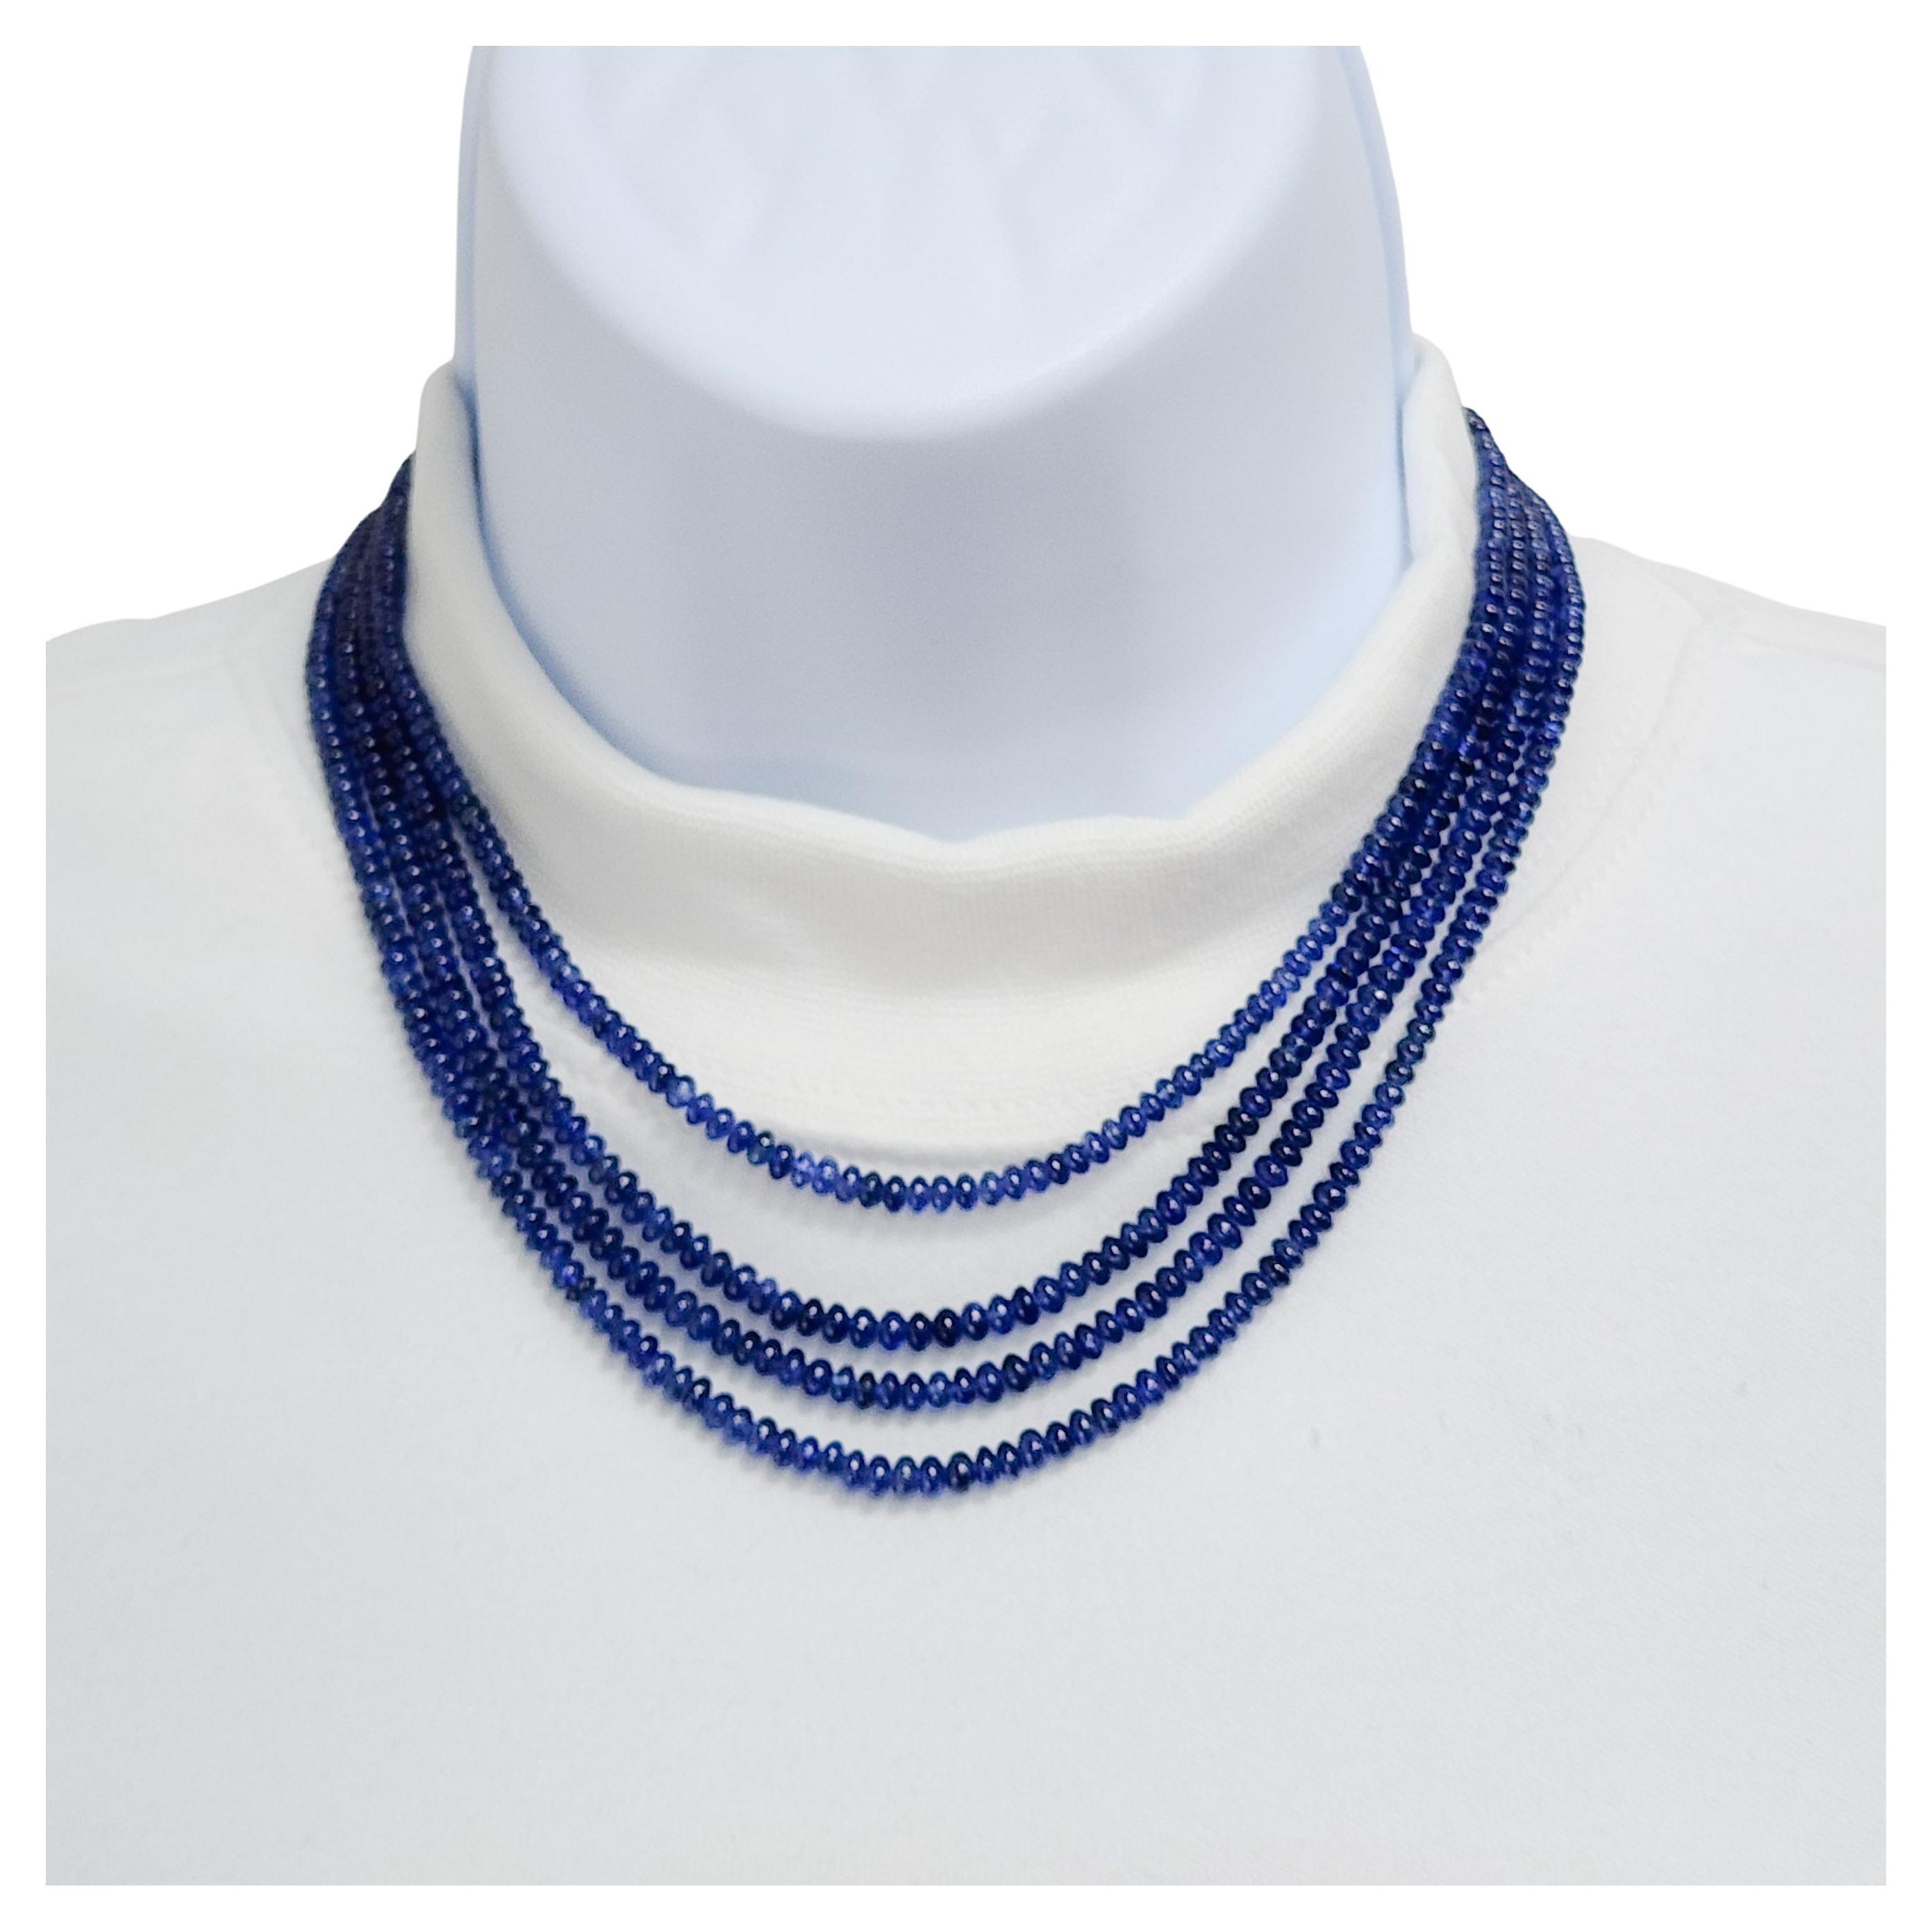 Gorgeous 344.10 ct. unheated Burma blue sapphire beads with good quality, white, and bright diamond marquises, baguettes, and rounds.  Handmade clasp in platinum.  Four total strands of beads.  GIA certificate included.